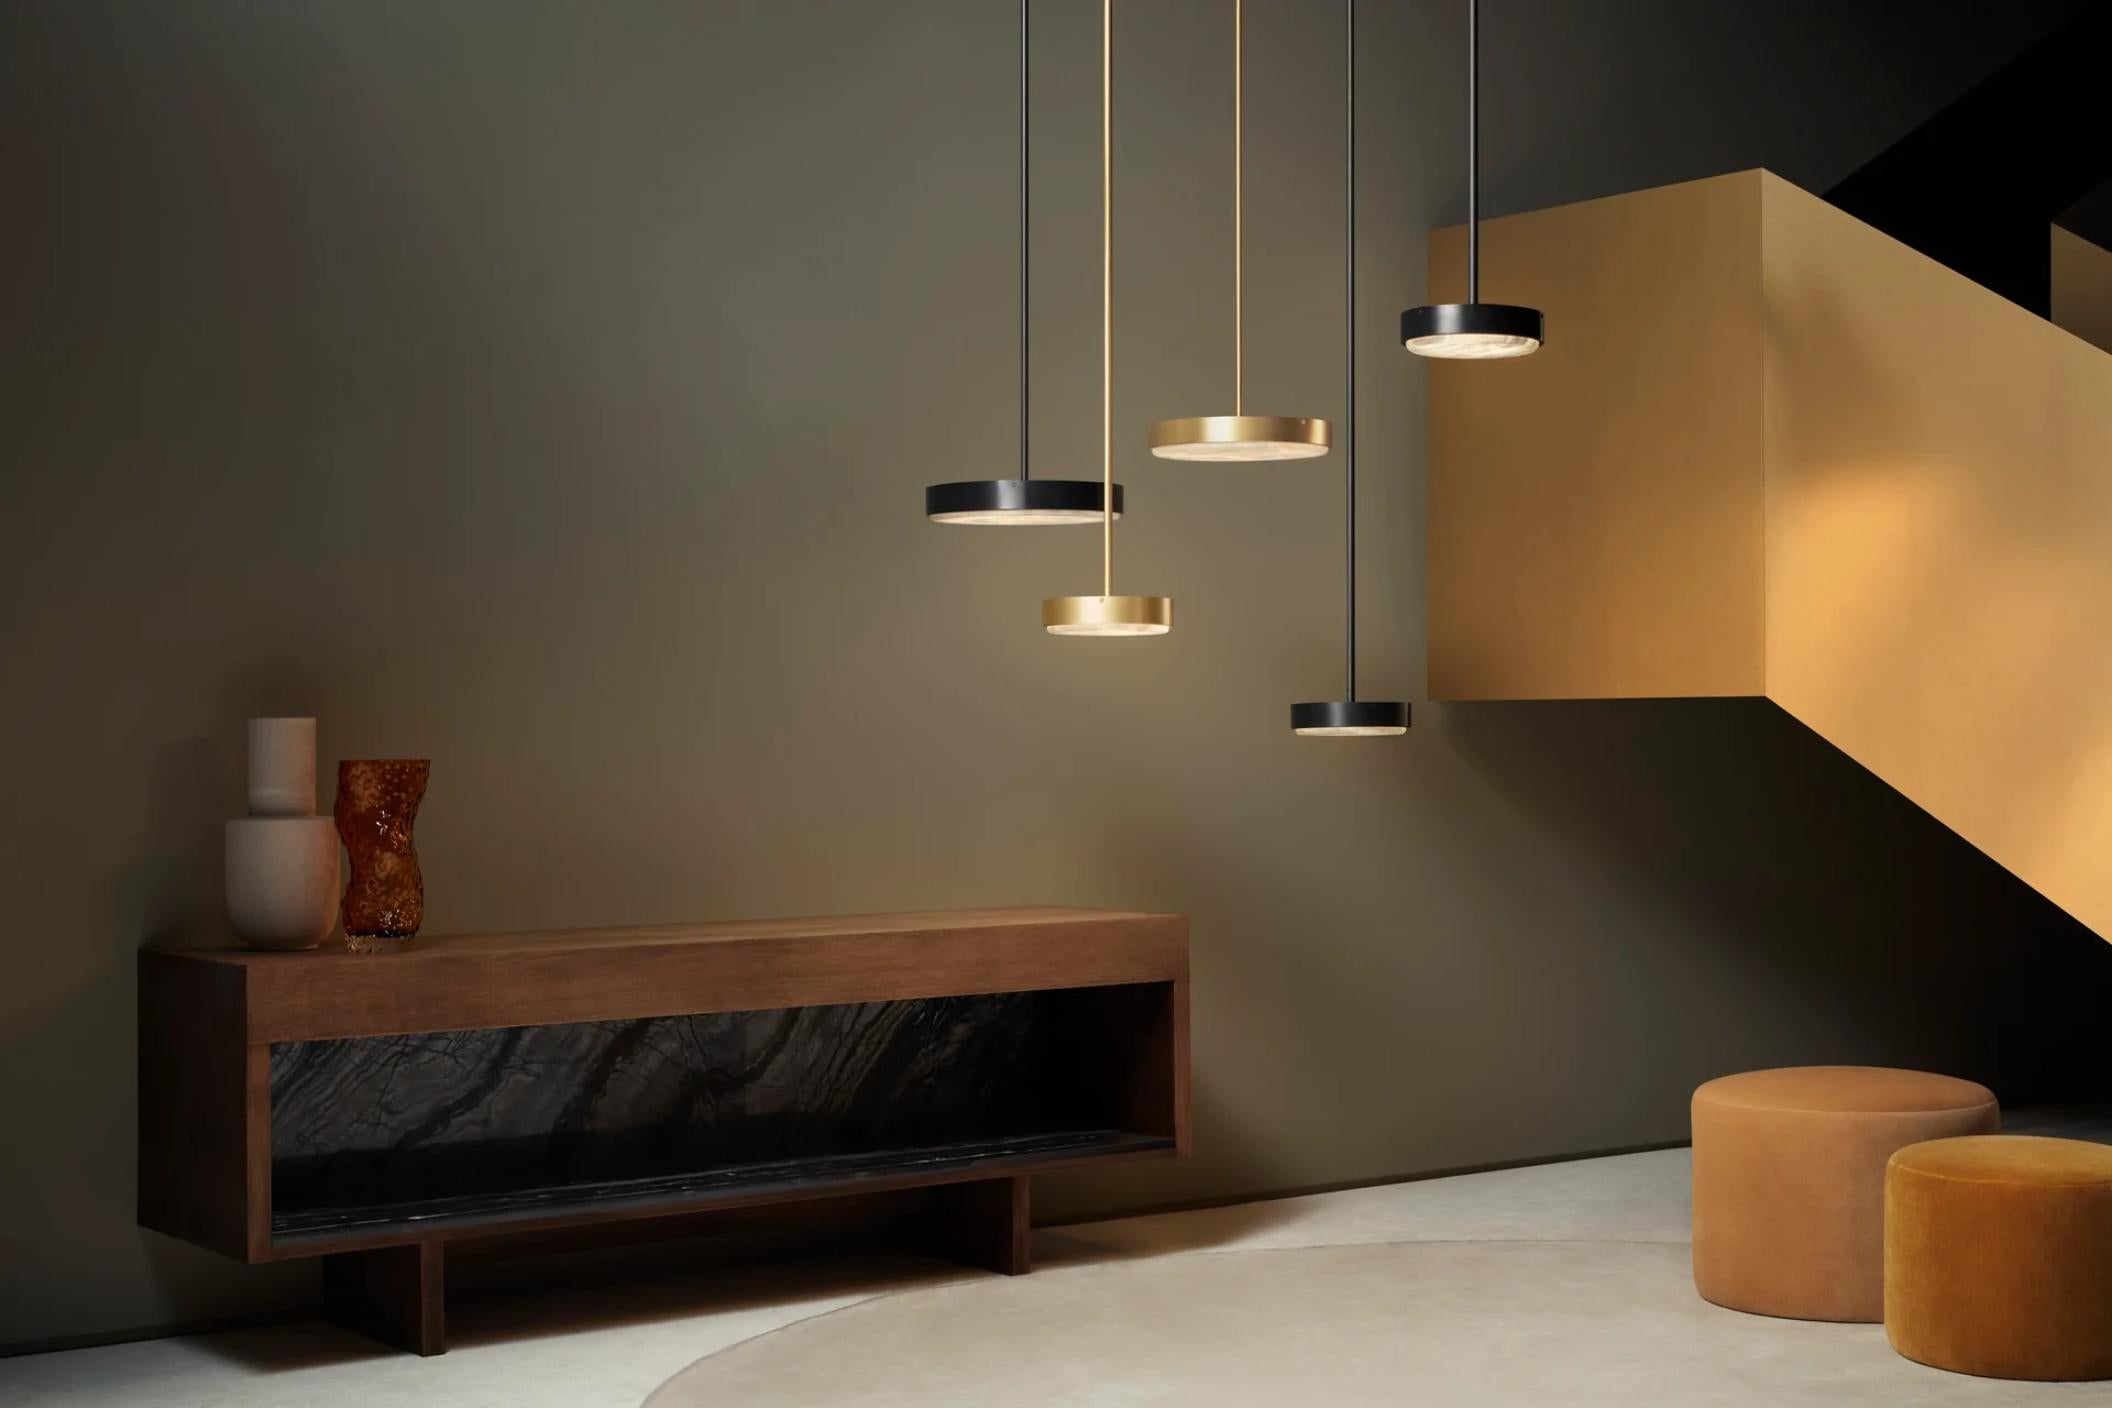 Anvers medium pendant by CTO Lighting
Materials: satin brass with alabaster stone
Also available in bronze with alabaster stone
Dimensions: H 6.8 x W 33.5 cm 

All our lamps can be wired according to each country. If sold to the USA it will be